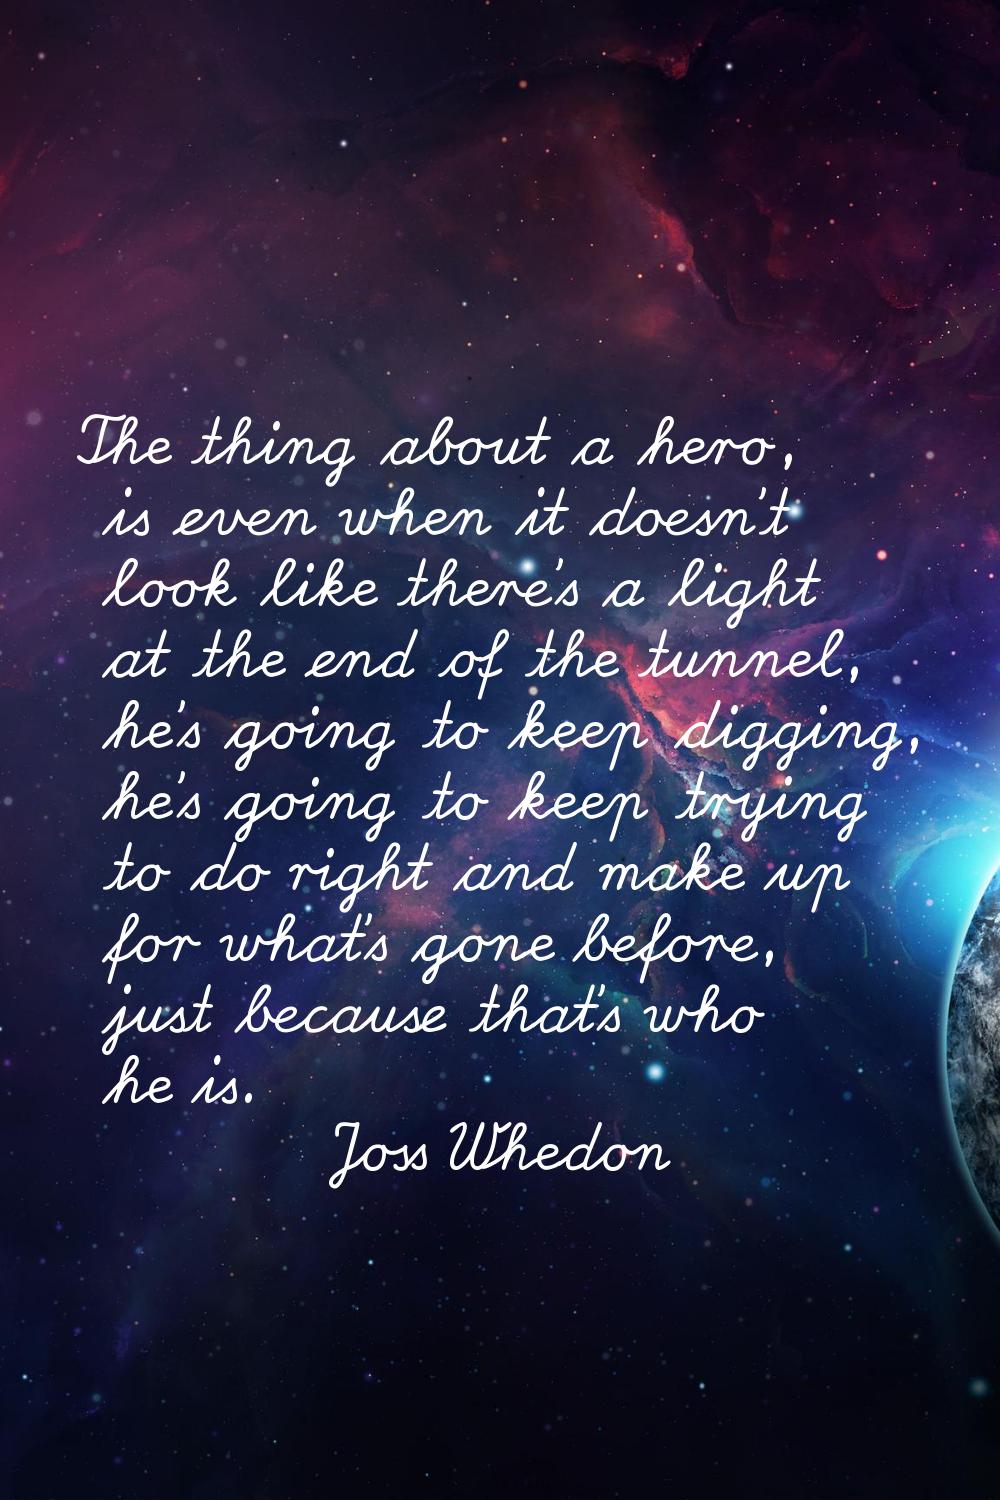 The thing about a hero, is even when it doesn't look like there's a light at the end of the tunnel,